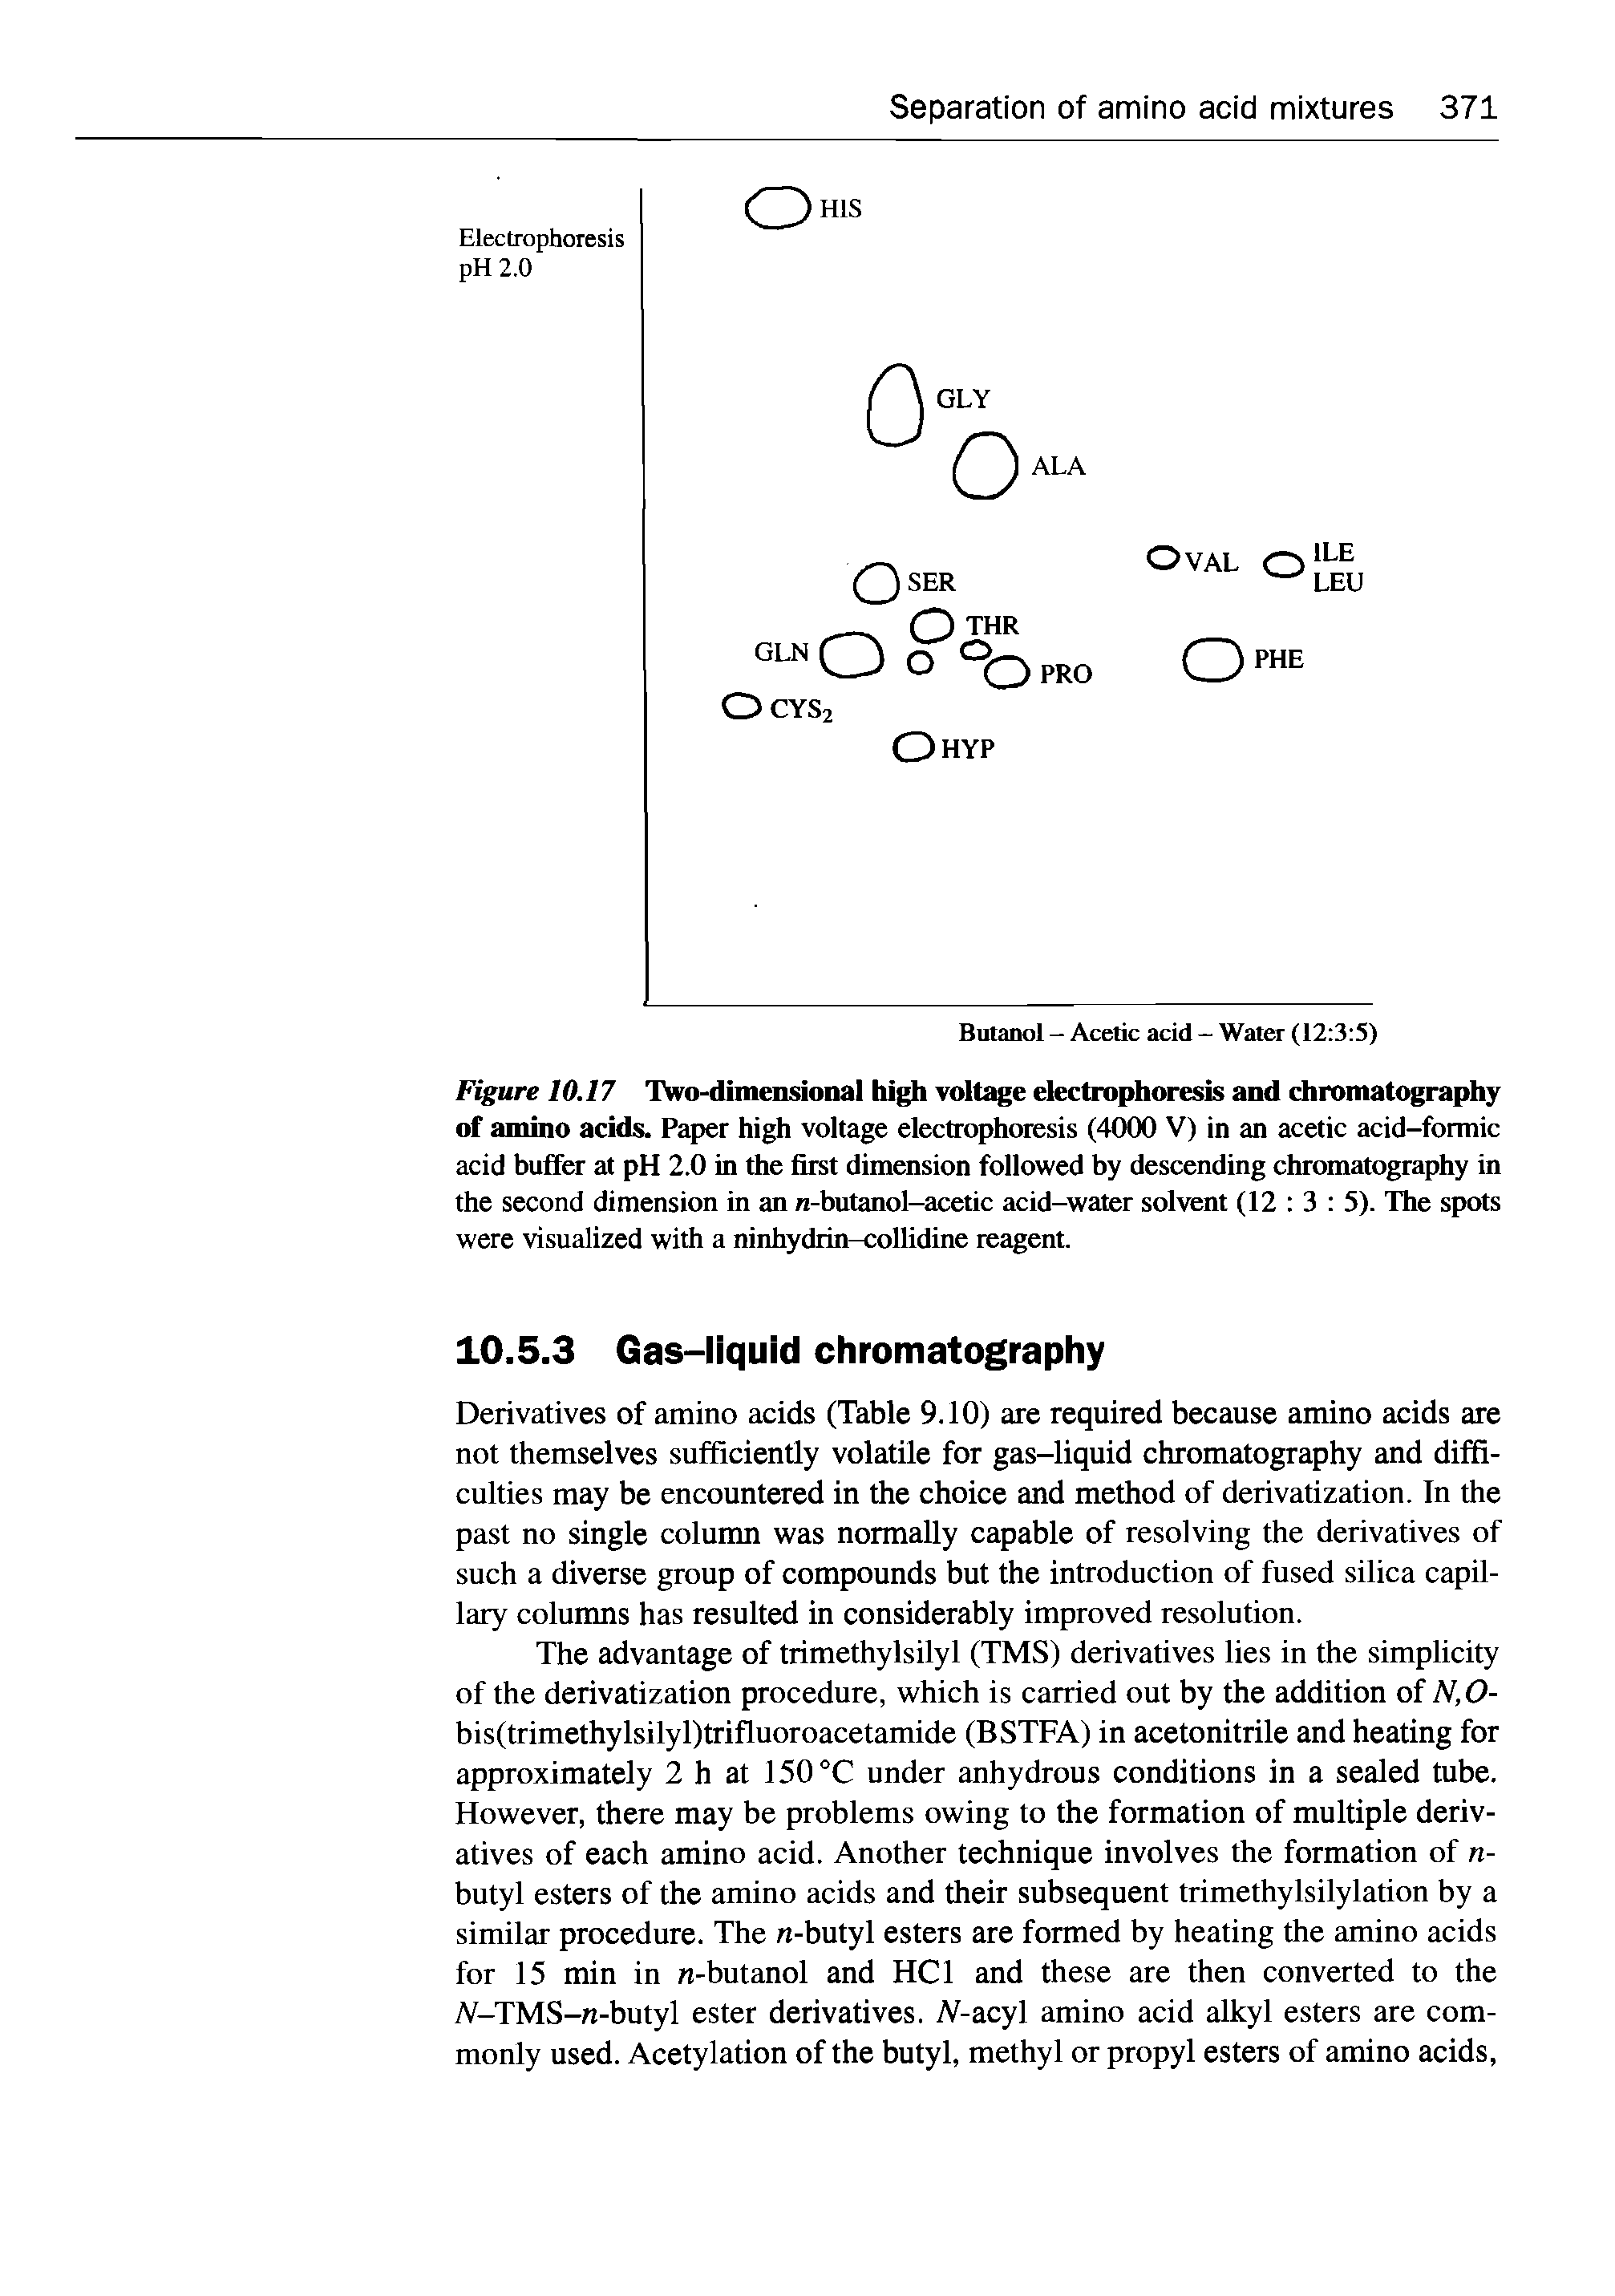 Figure 10.17 Two-dimensional high voltage electrophoresis and chromatography of amino acids. Paper high voltage electrophoresis (4000 V) in an acetic acid-formic acid buffer at pH 2.0 in the first dimension followed by descending chromatography in the second dimension in an n-butanol-acetic acid-water solvent (12 3 5). The spots were visualized with a ninhydrin-collidine reagent.